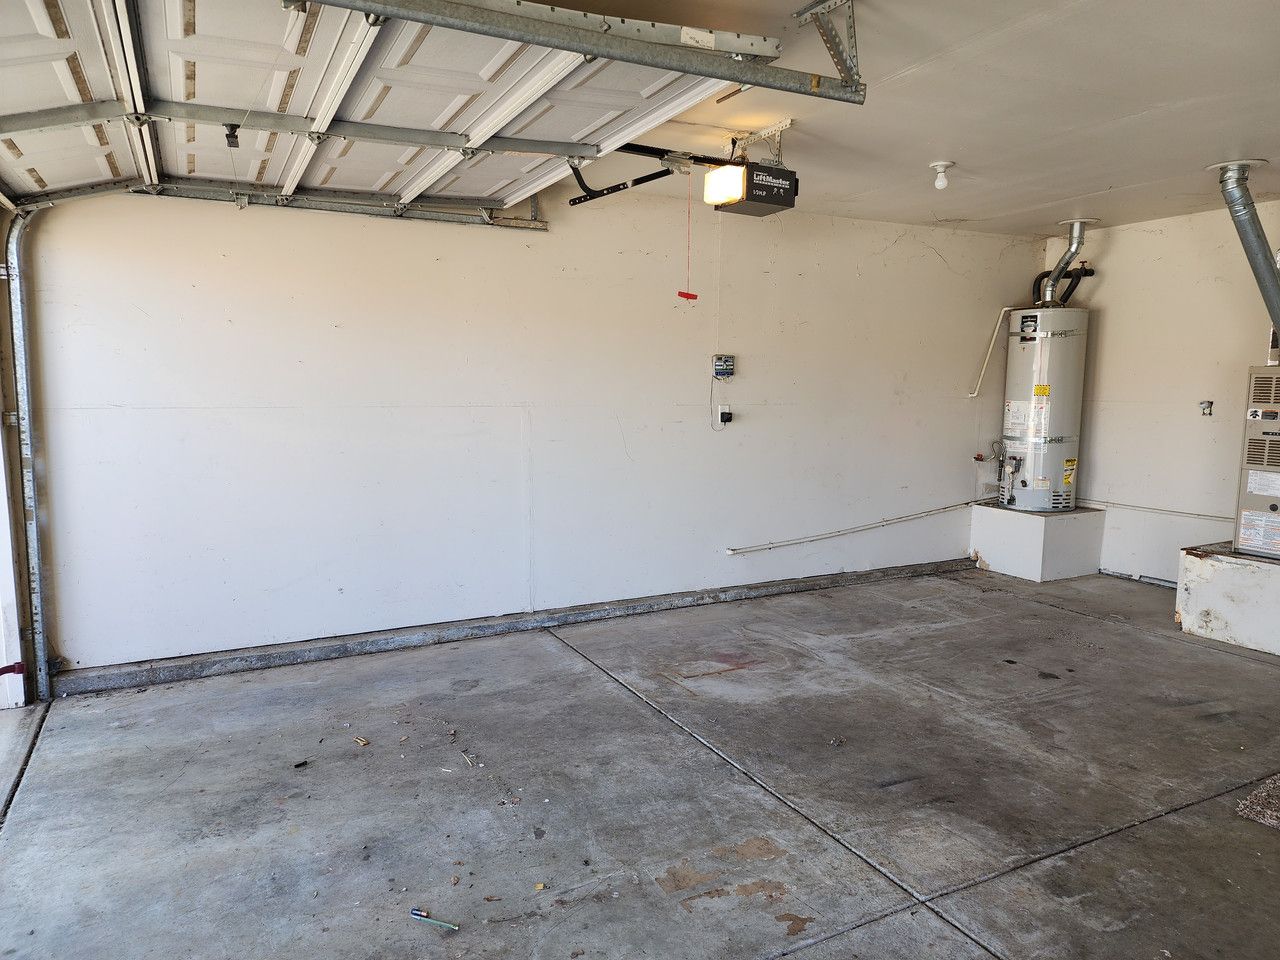 Empty garage with clean, uncluttered space, and a lone water heater visible in the background, symbolizing a well-maintained and organized area.